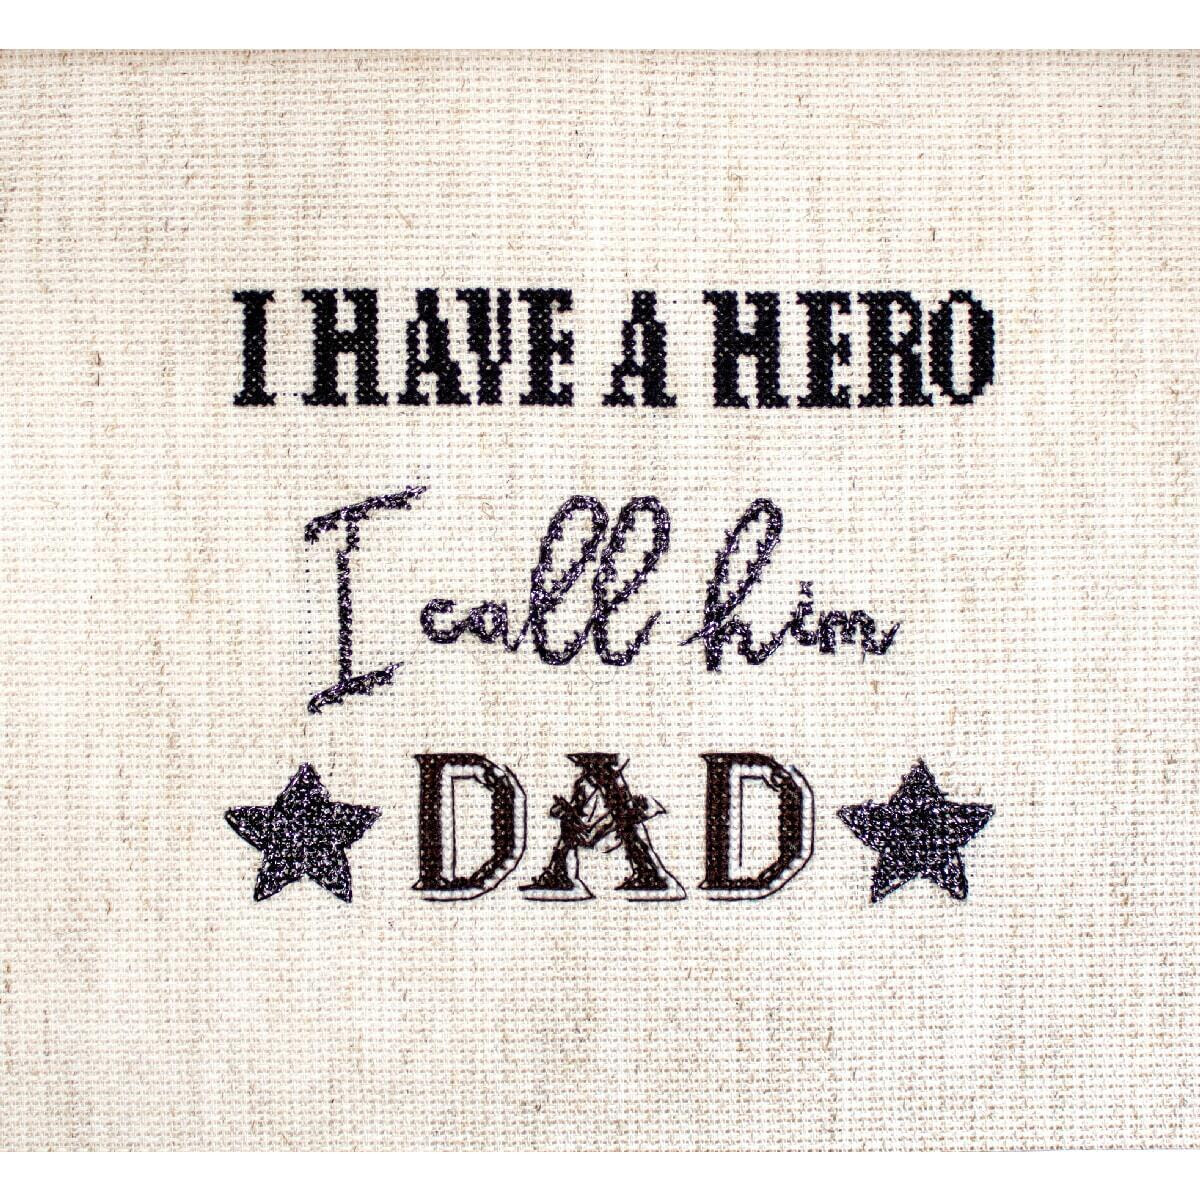 Letistitch counted cross stitch kit "Father’s...